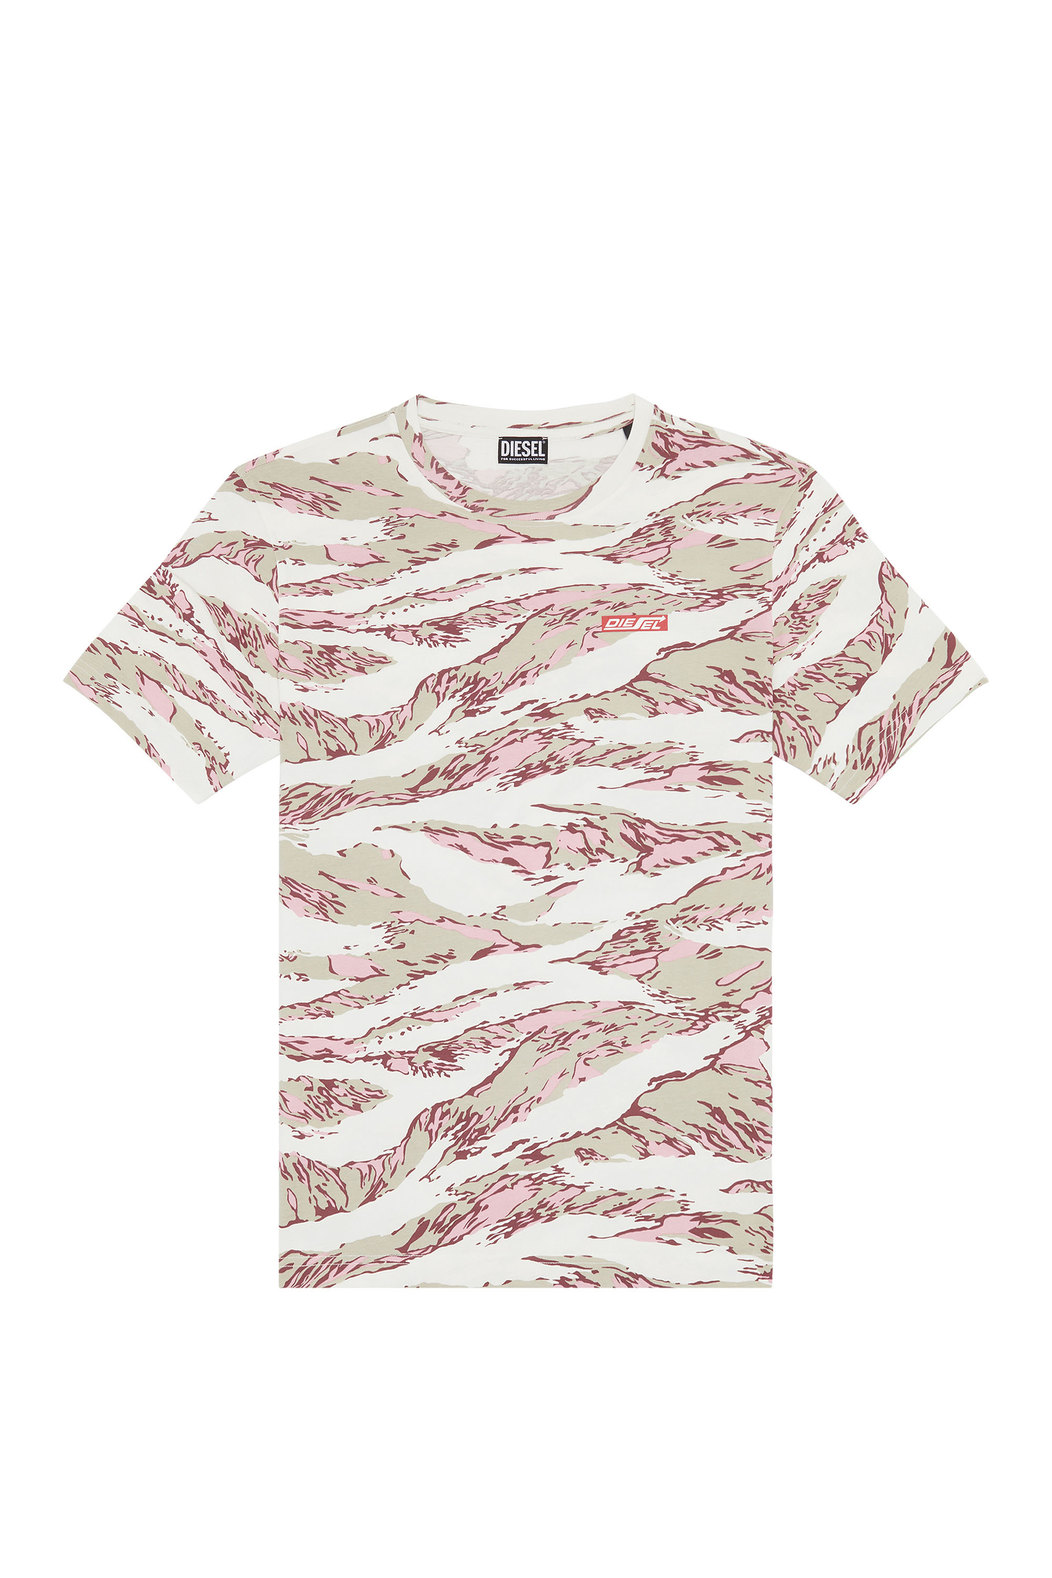 T-shirt with graphic camo print